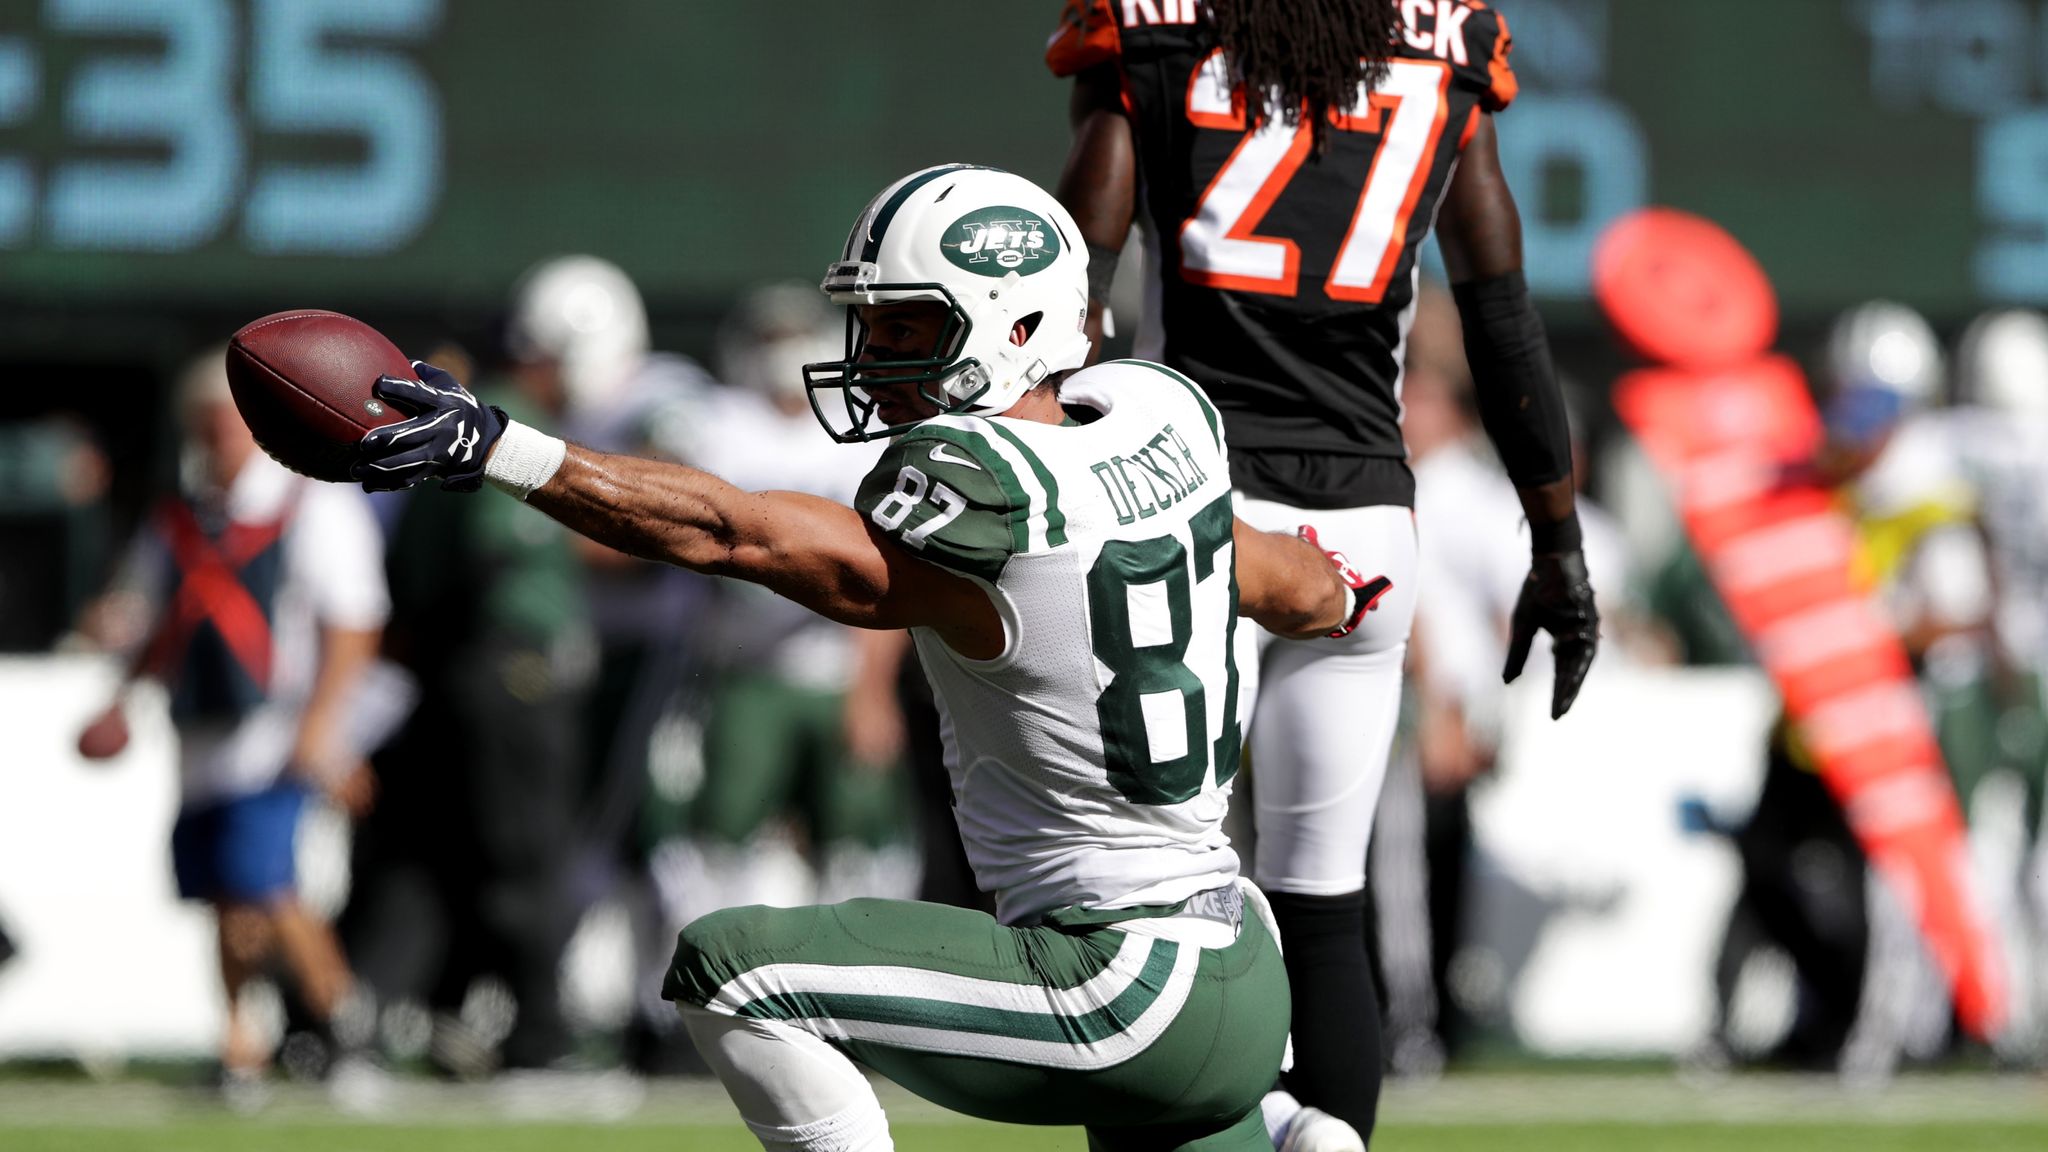 Eric Decker and David Harris latest names to leave New York Jets